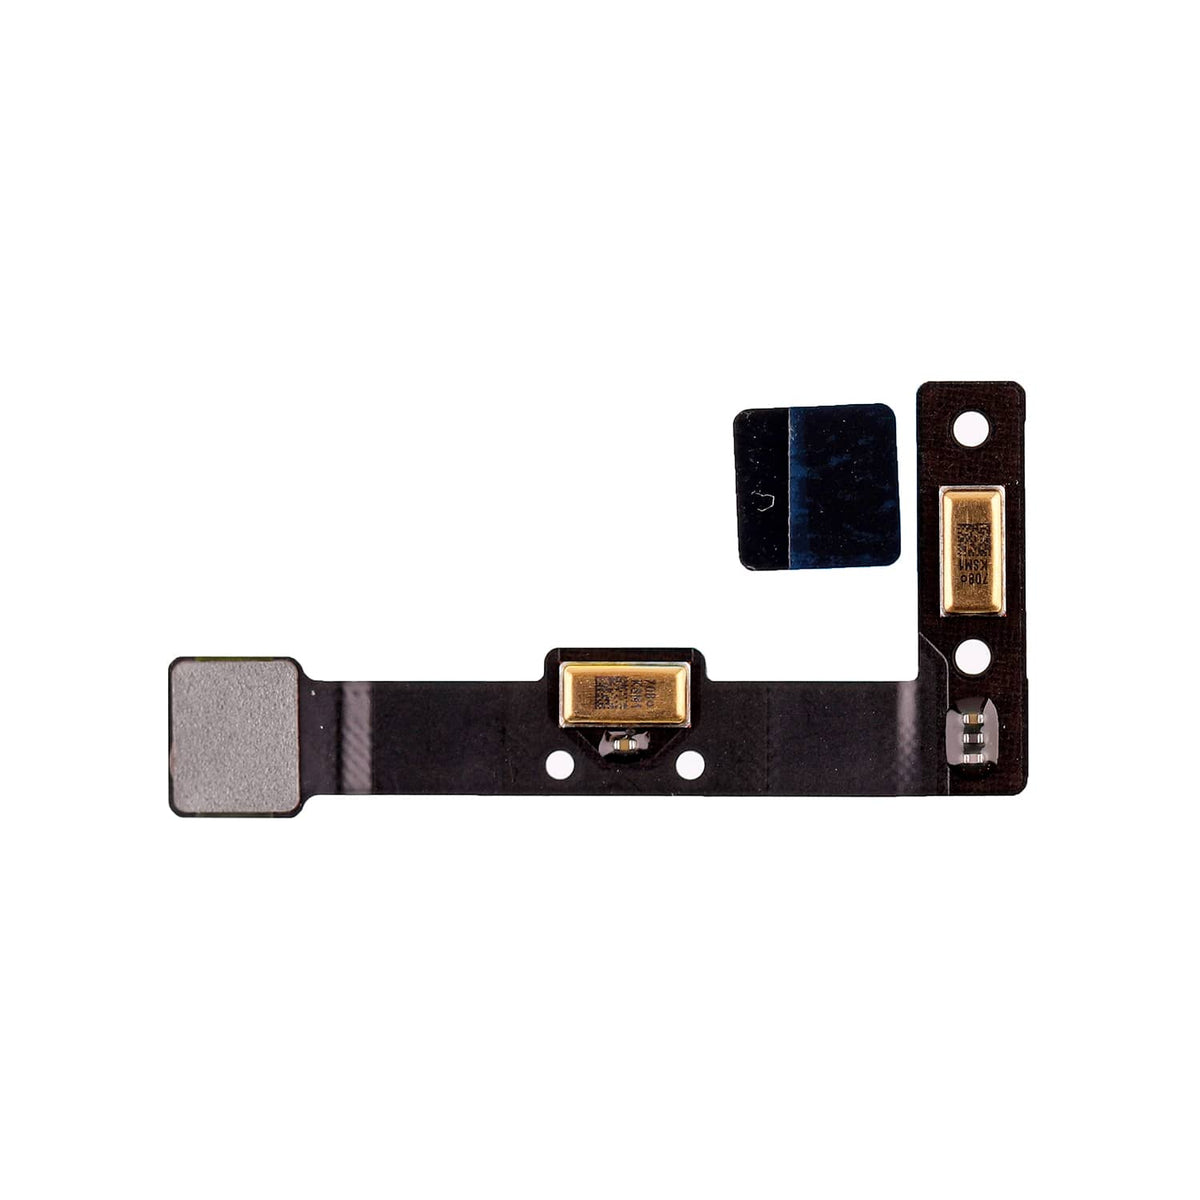 MICROPHONE FLEX CABLE FOR IPAD PRO 12.9 2ND GEN